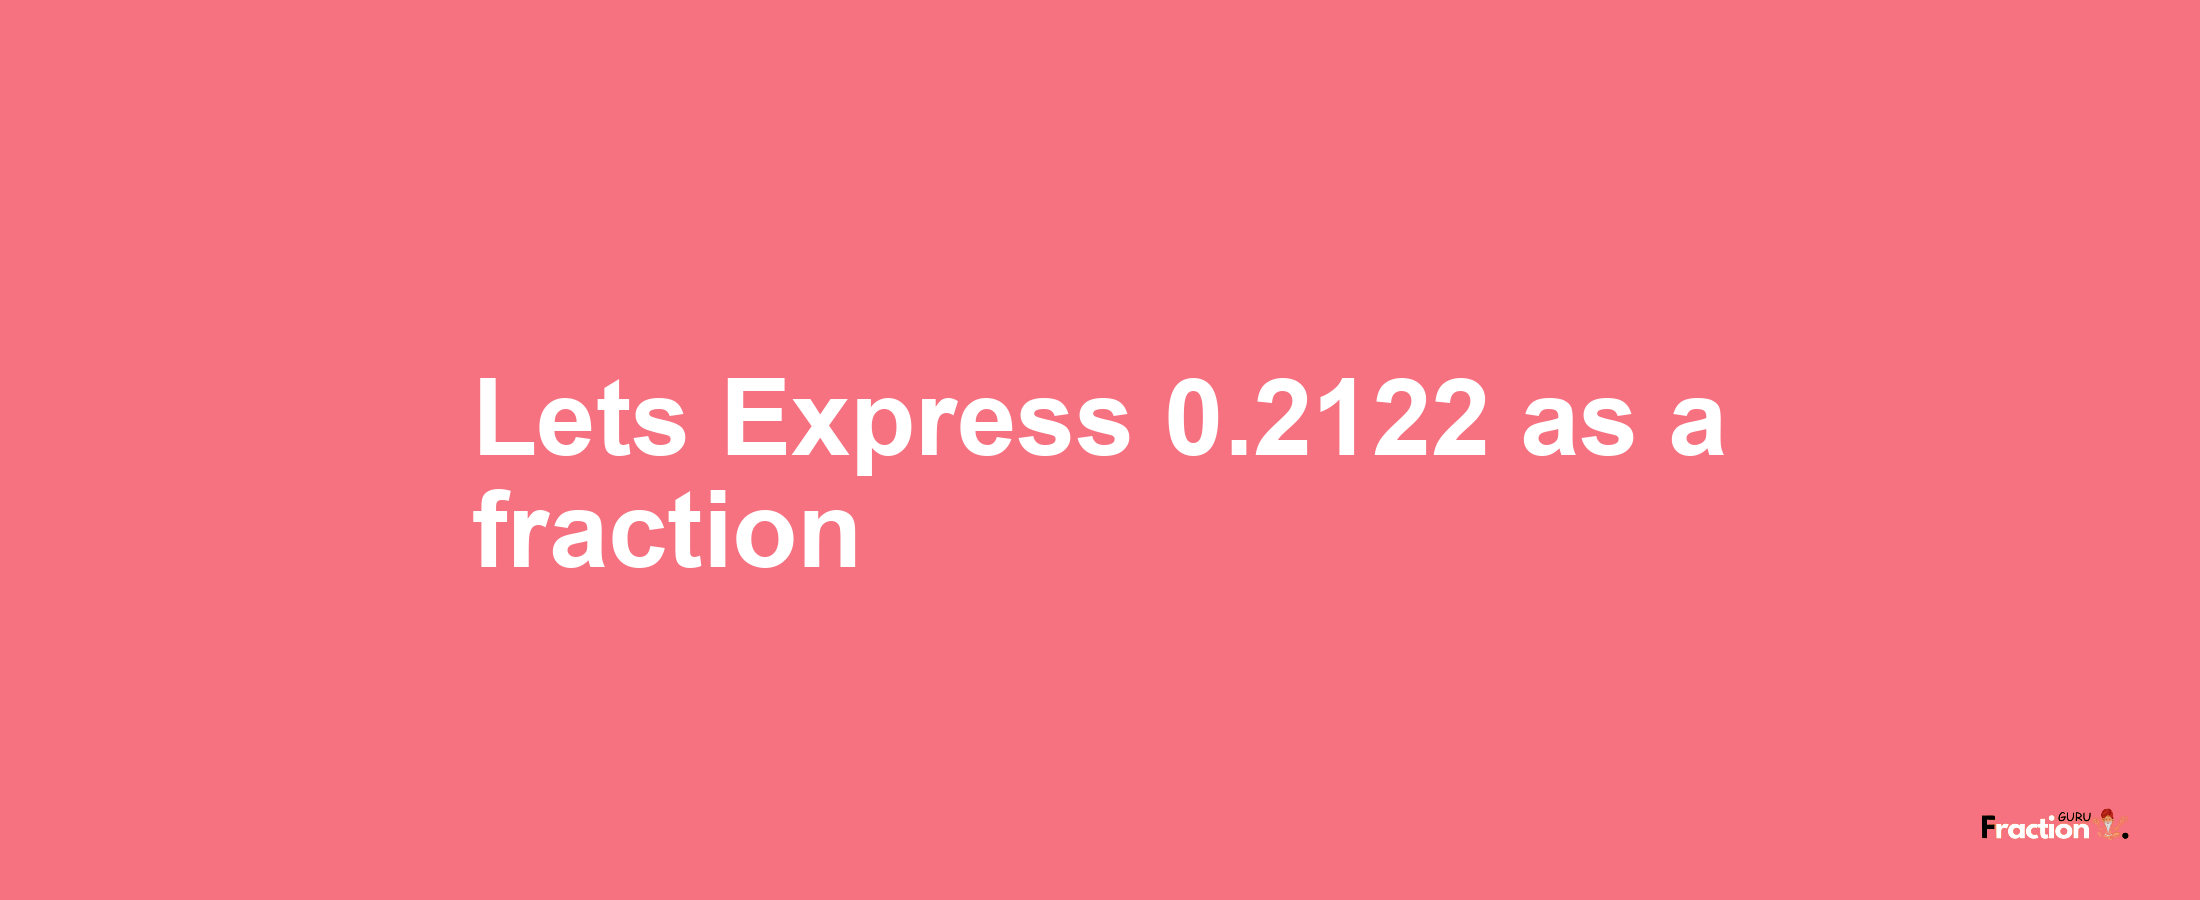 Lets Express 0.2122 as afraction